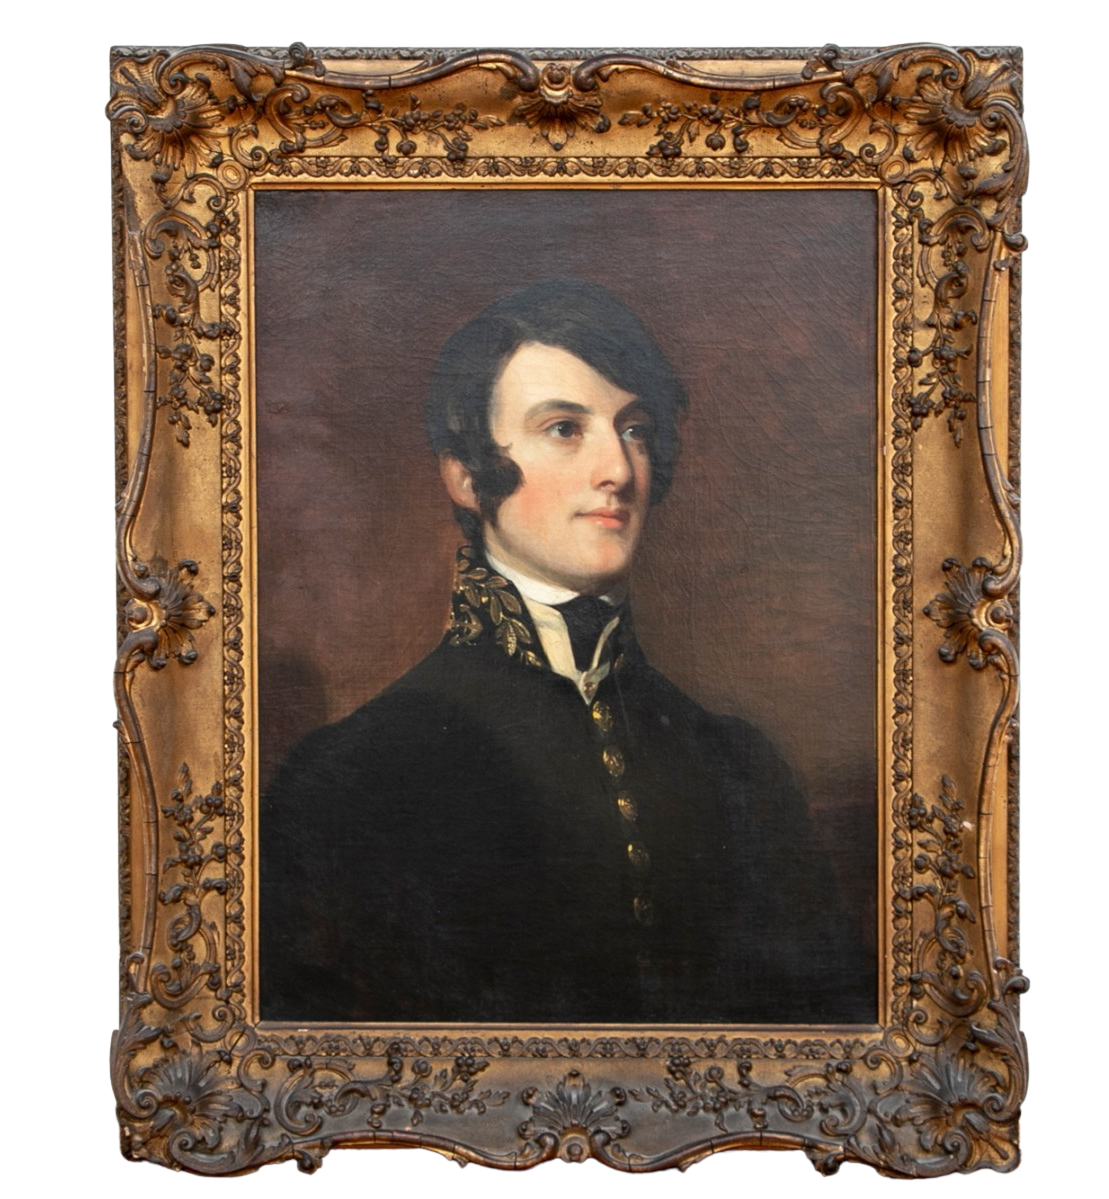 Antique oil painting on canvas portrait attributed by repute to Thomas Sully, and American painter (1783-1872)